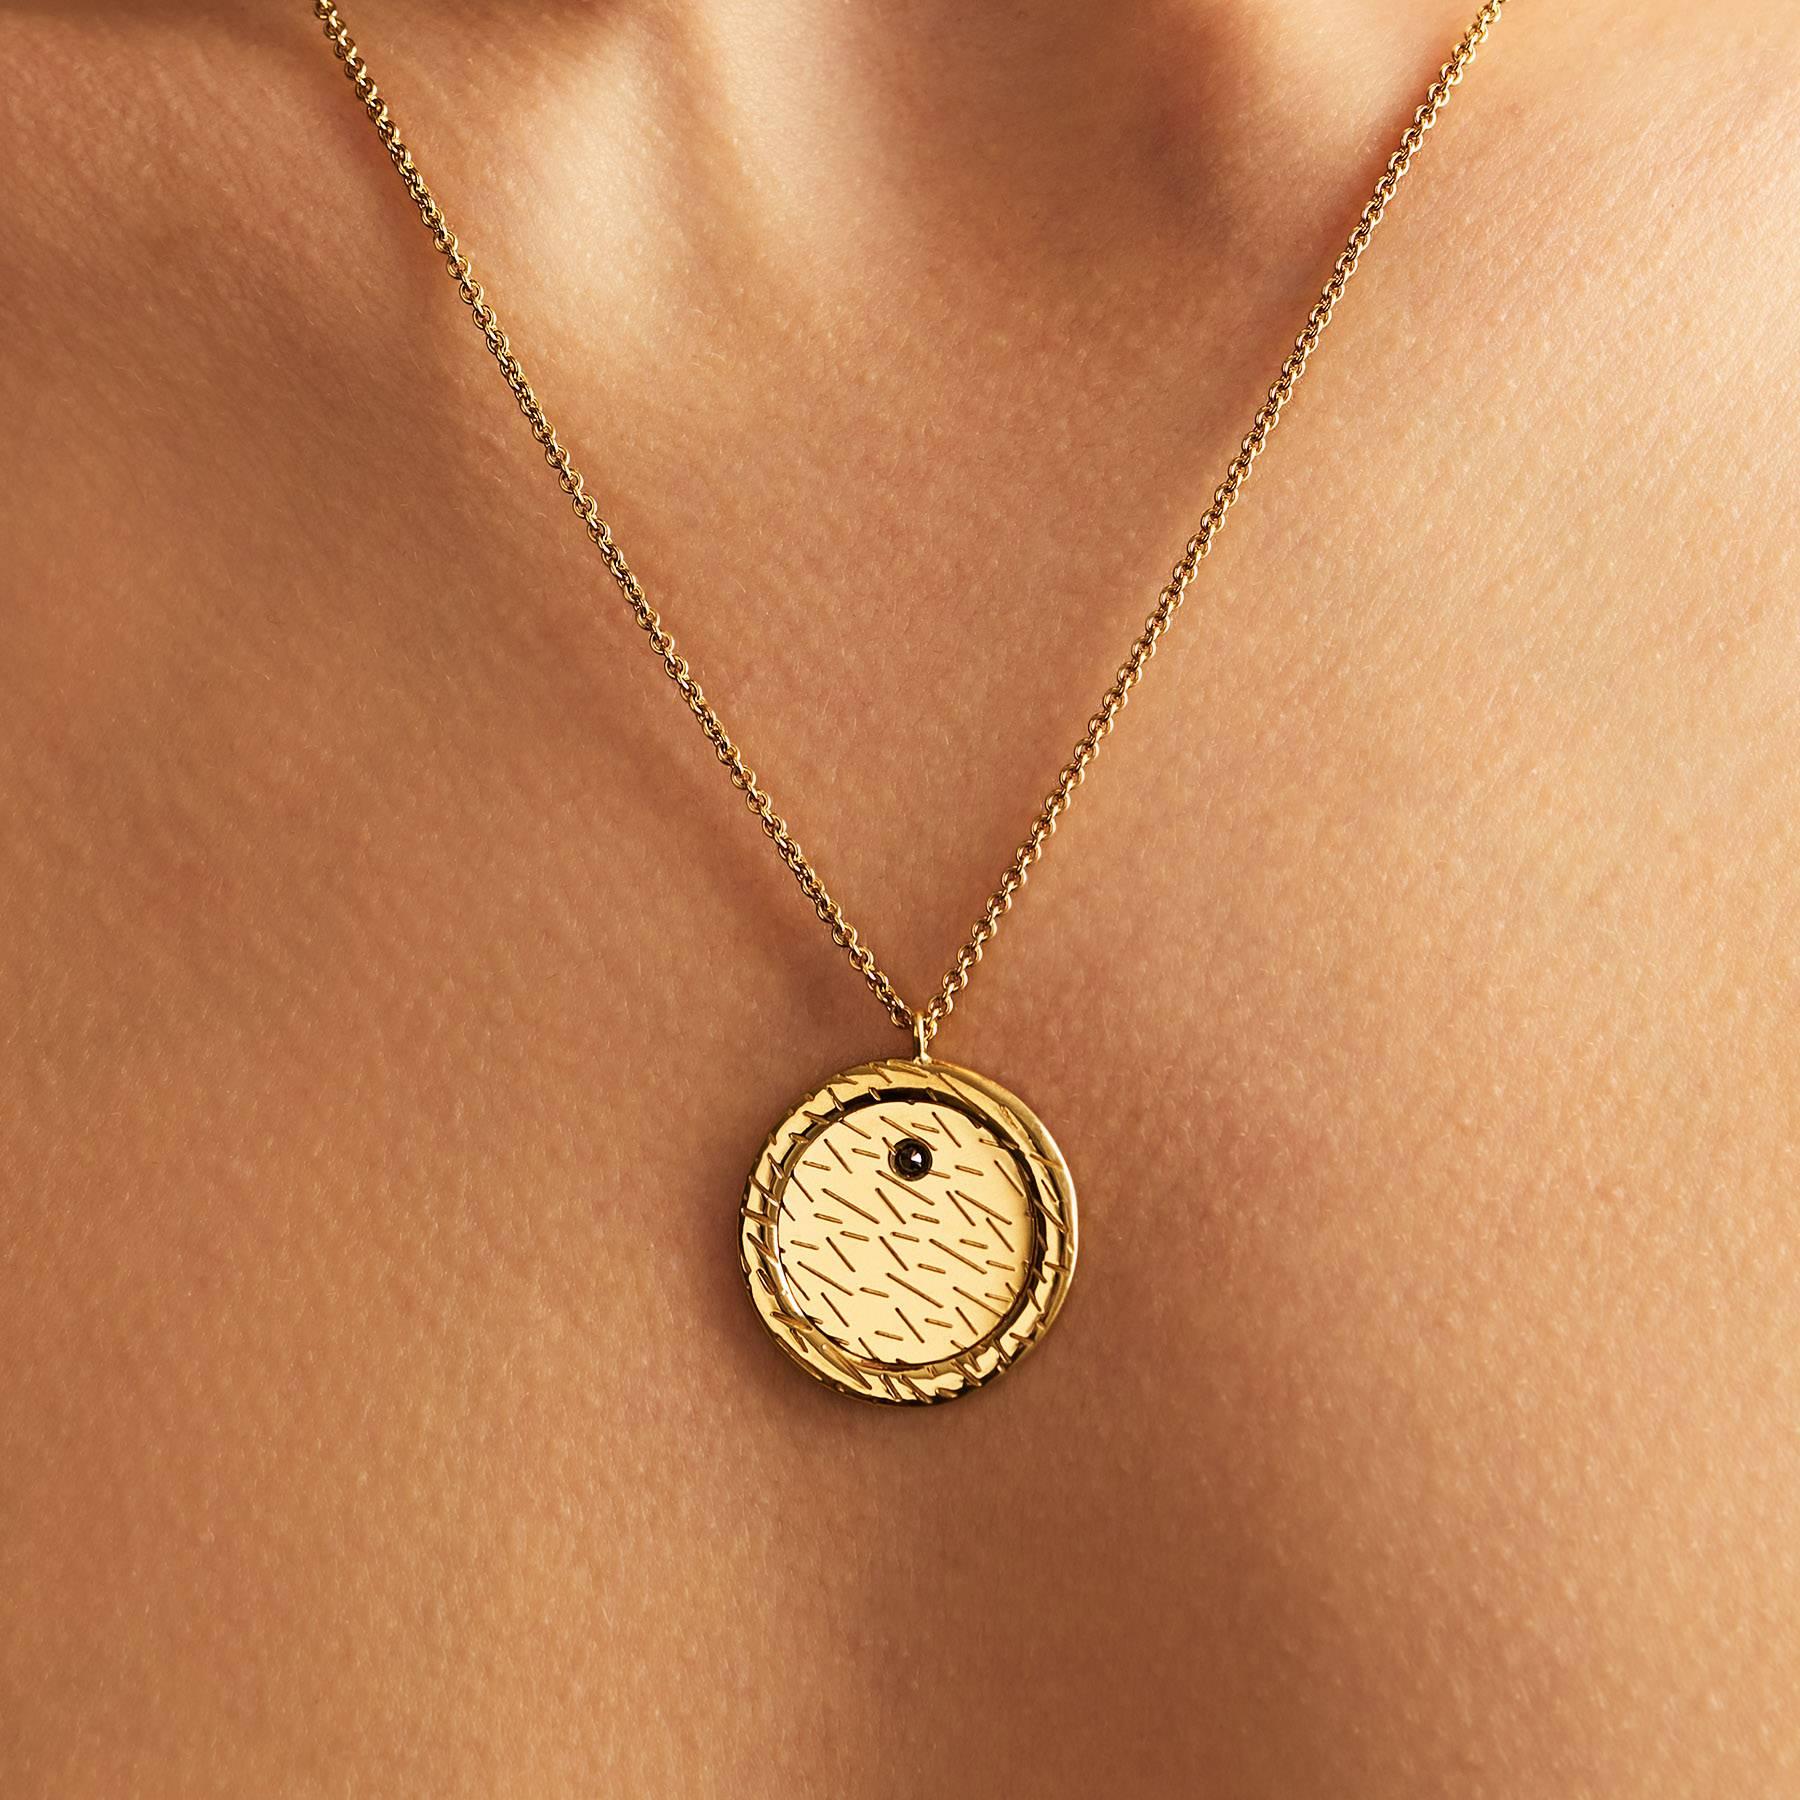 18ct yellow gold pendant necklace with fur texture engraving and 0.04ct black diamond
Fully adjustable length chain; sizes 18” and 22”* available
Circle diameter measuring 21mm
Made in London

The statement black diamond pendant features our